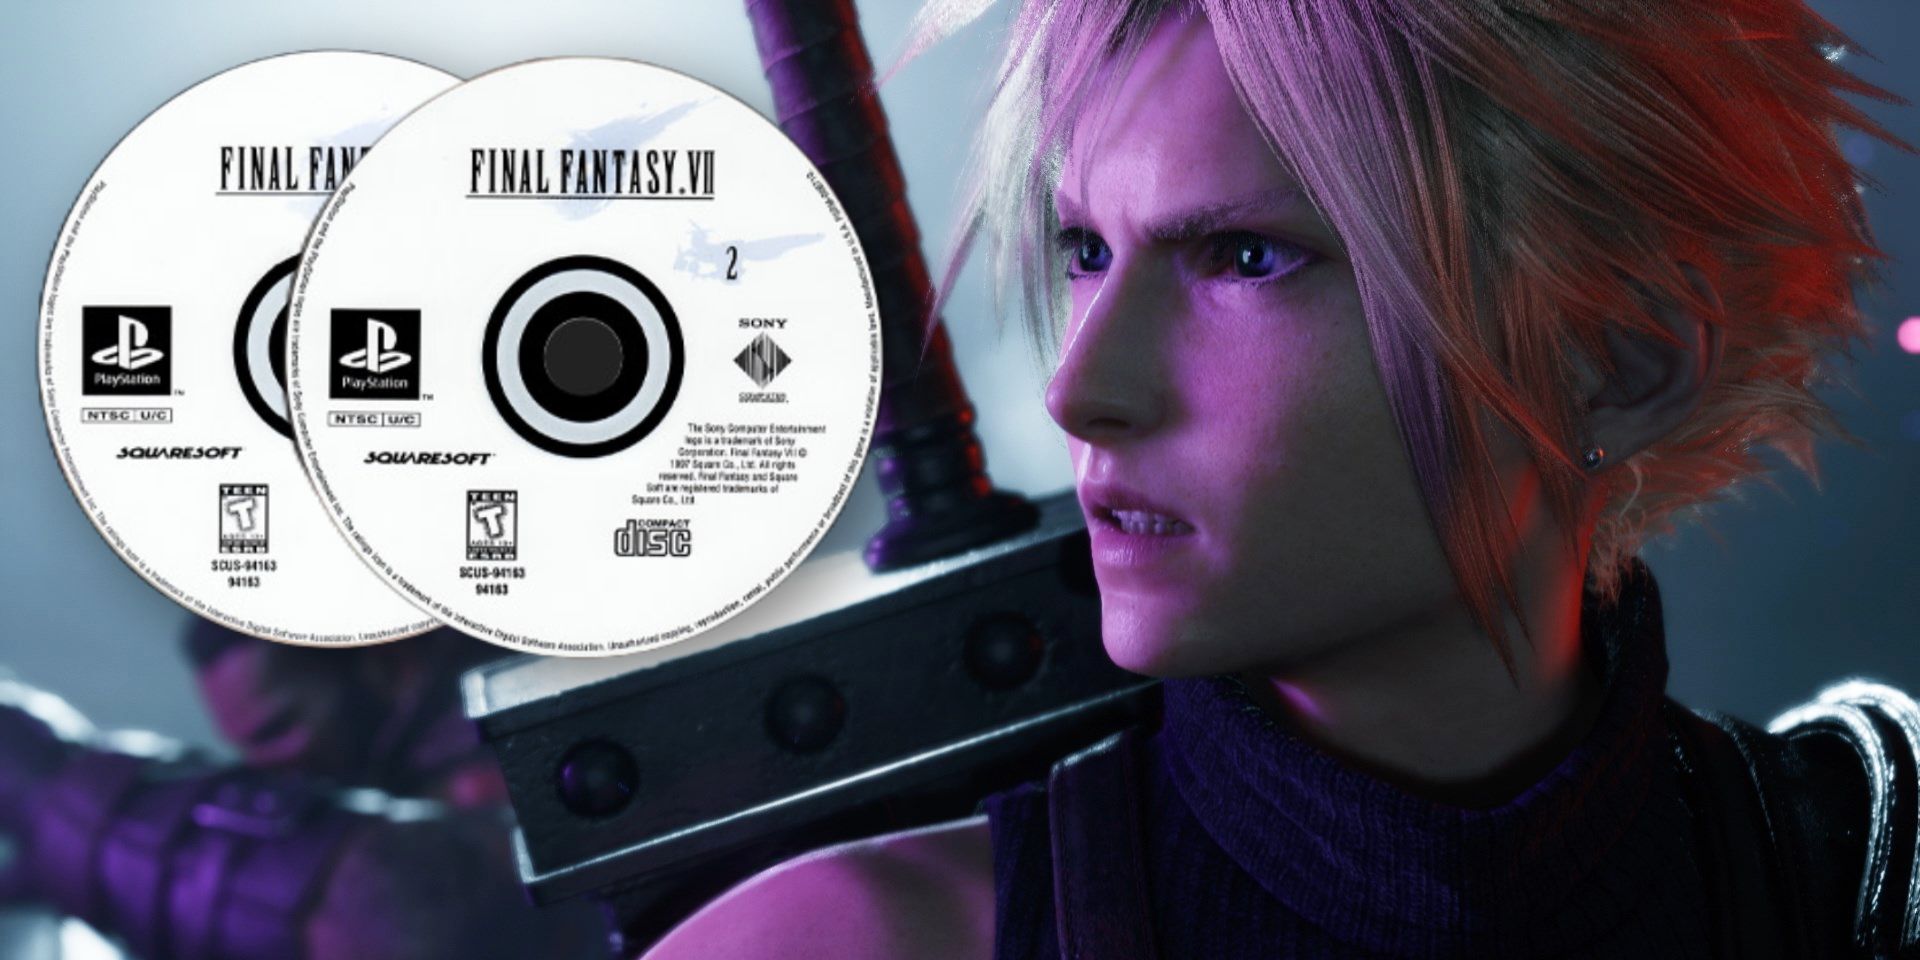 How Much of Final Fantasy VII's Story FFVII Rebirth Covers